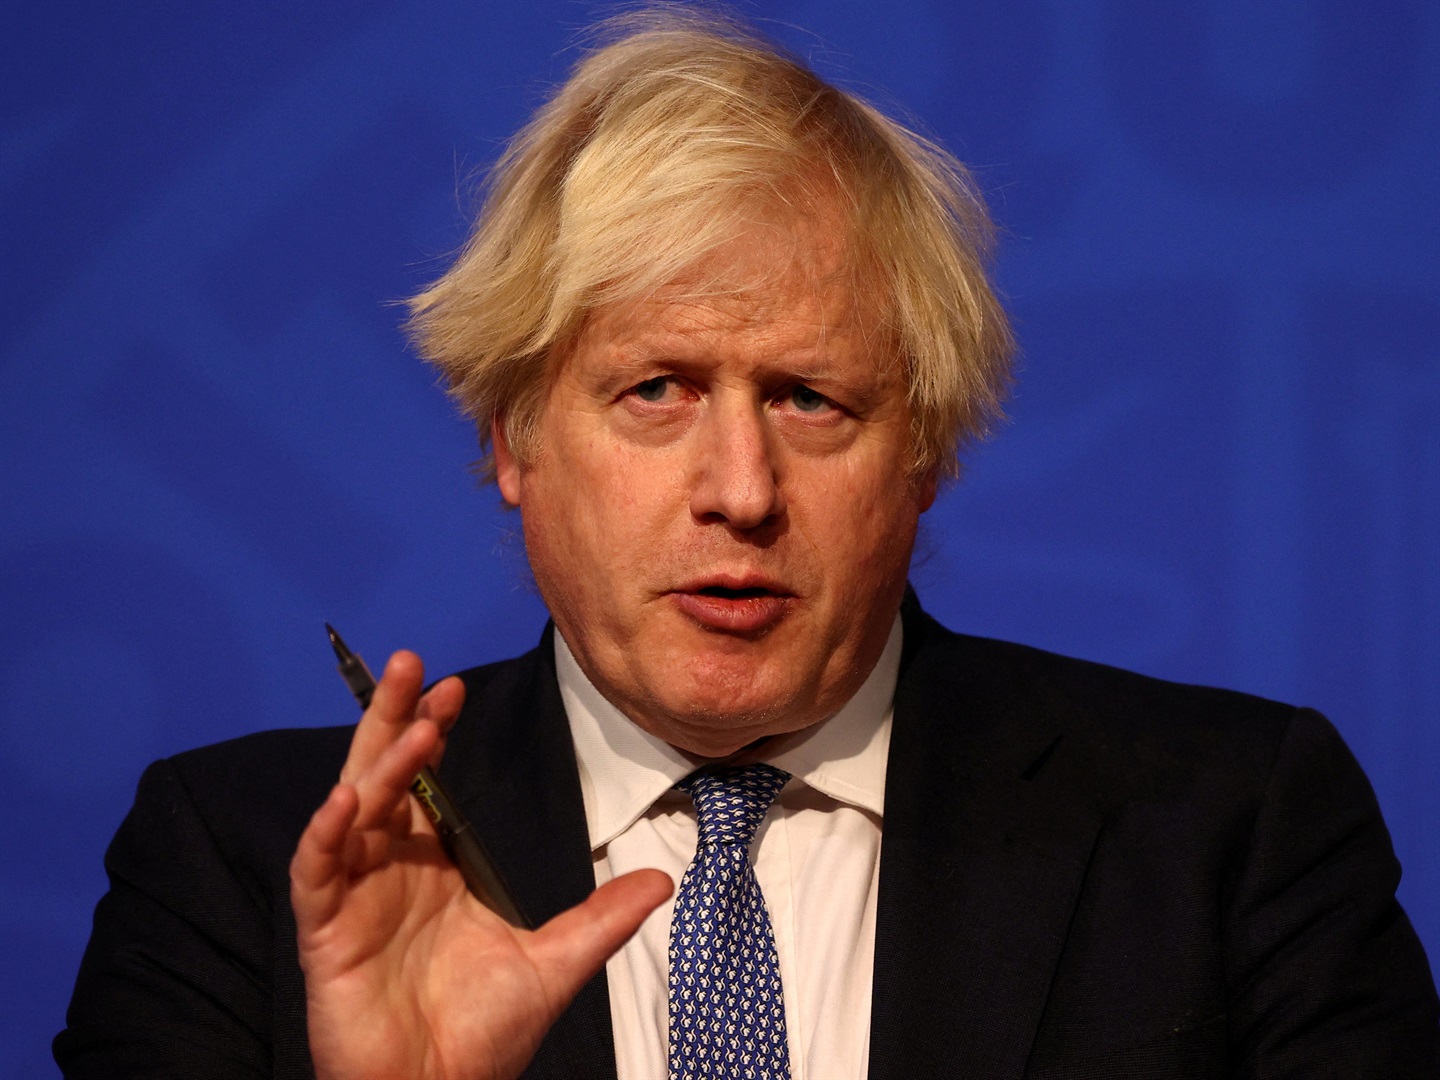 hoping-to-win-back-voters-boris-johnson-returns-to-election-pledges-news24